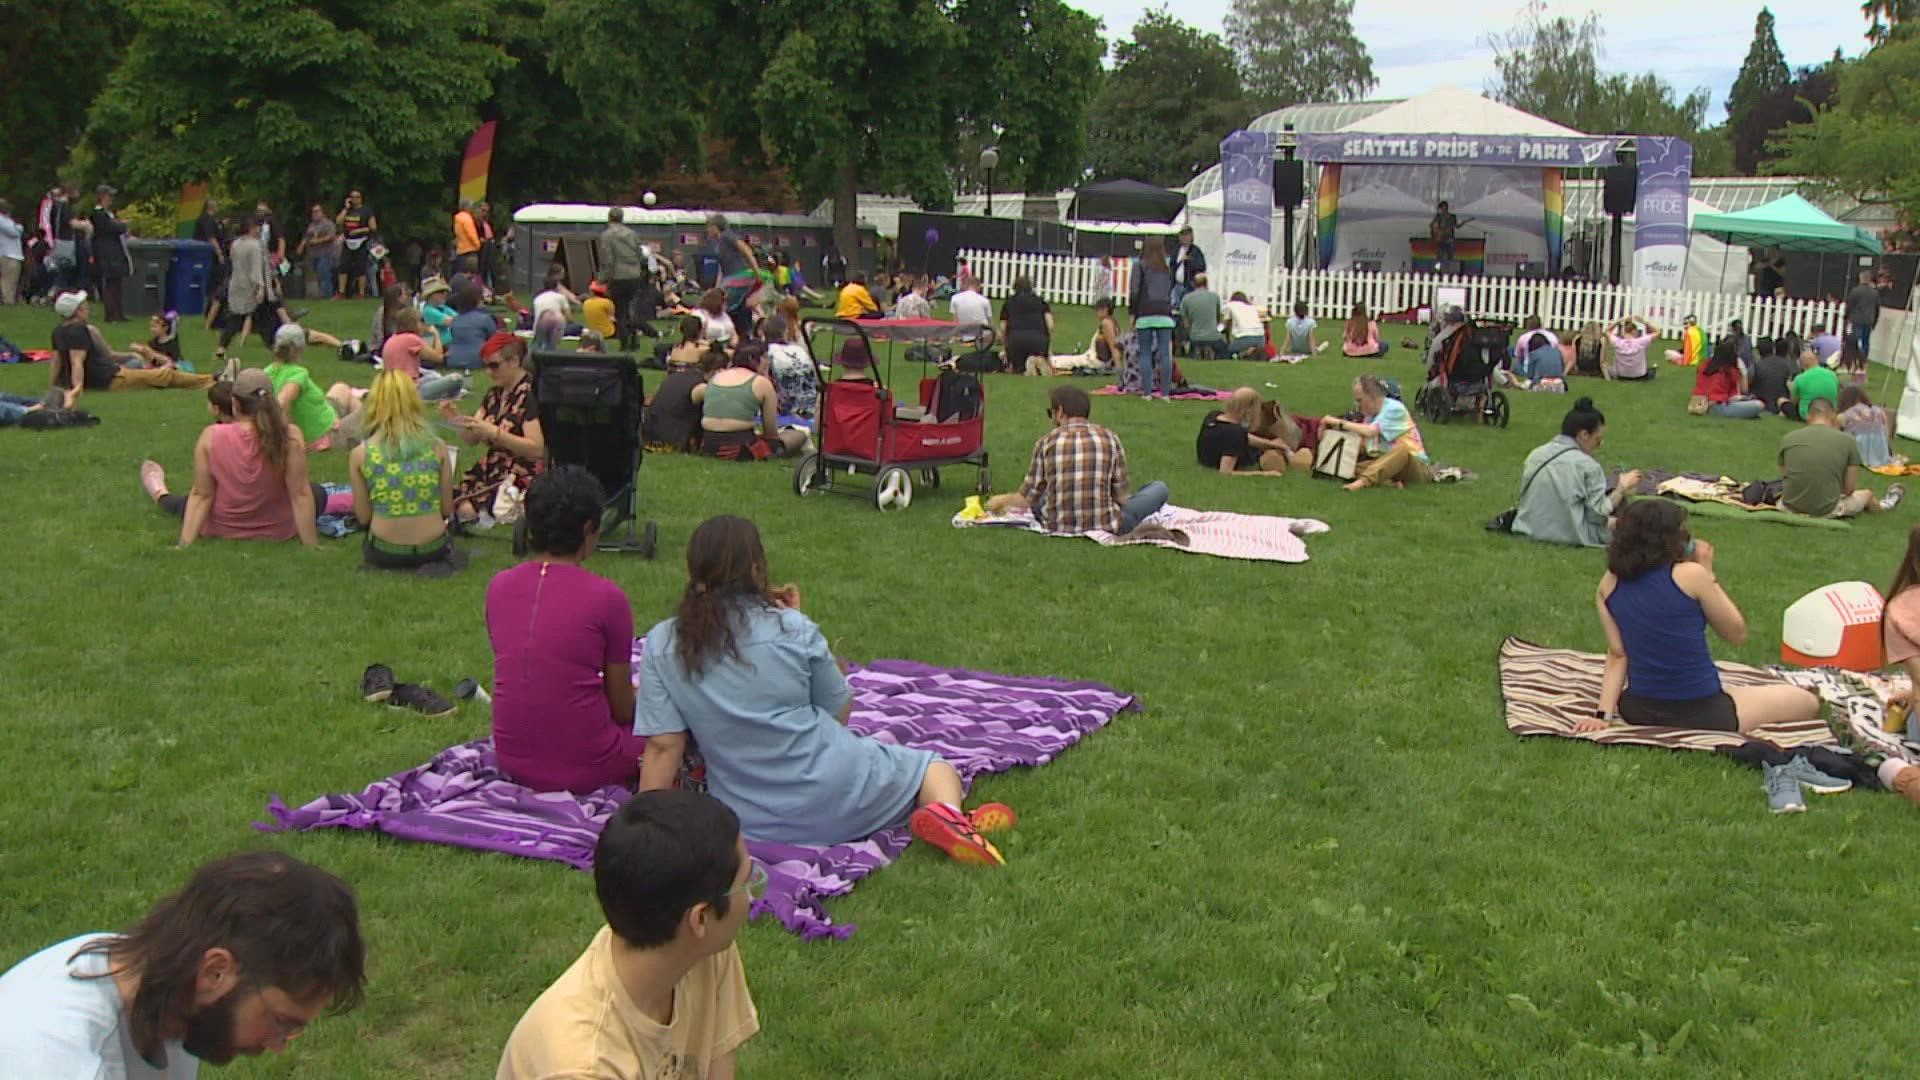 Thousands visited Volunteer Park Saturday for the event.